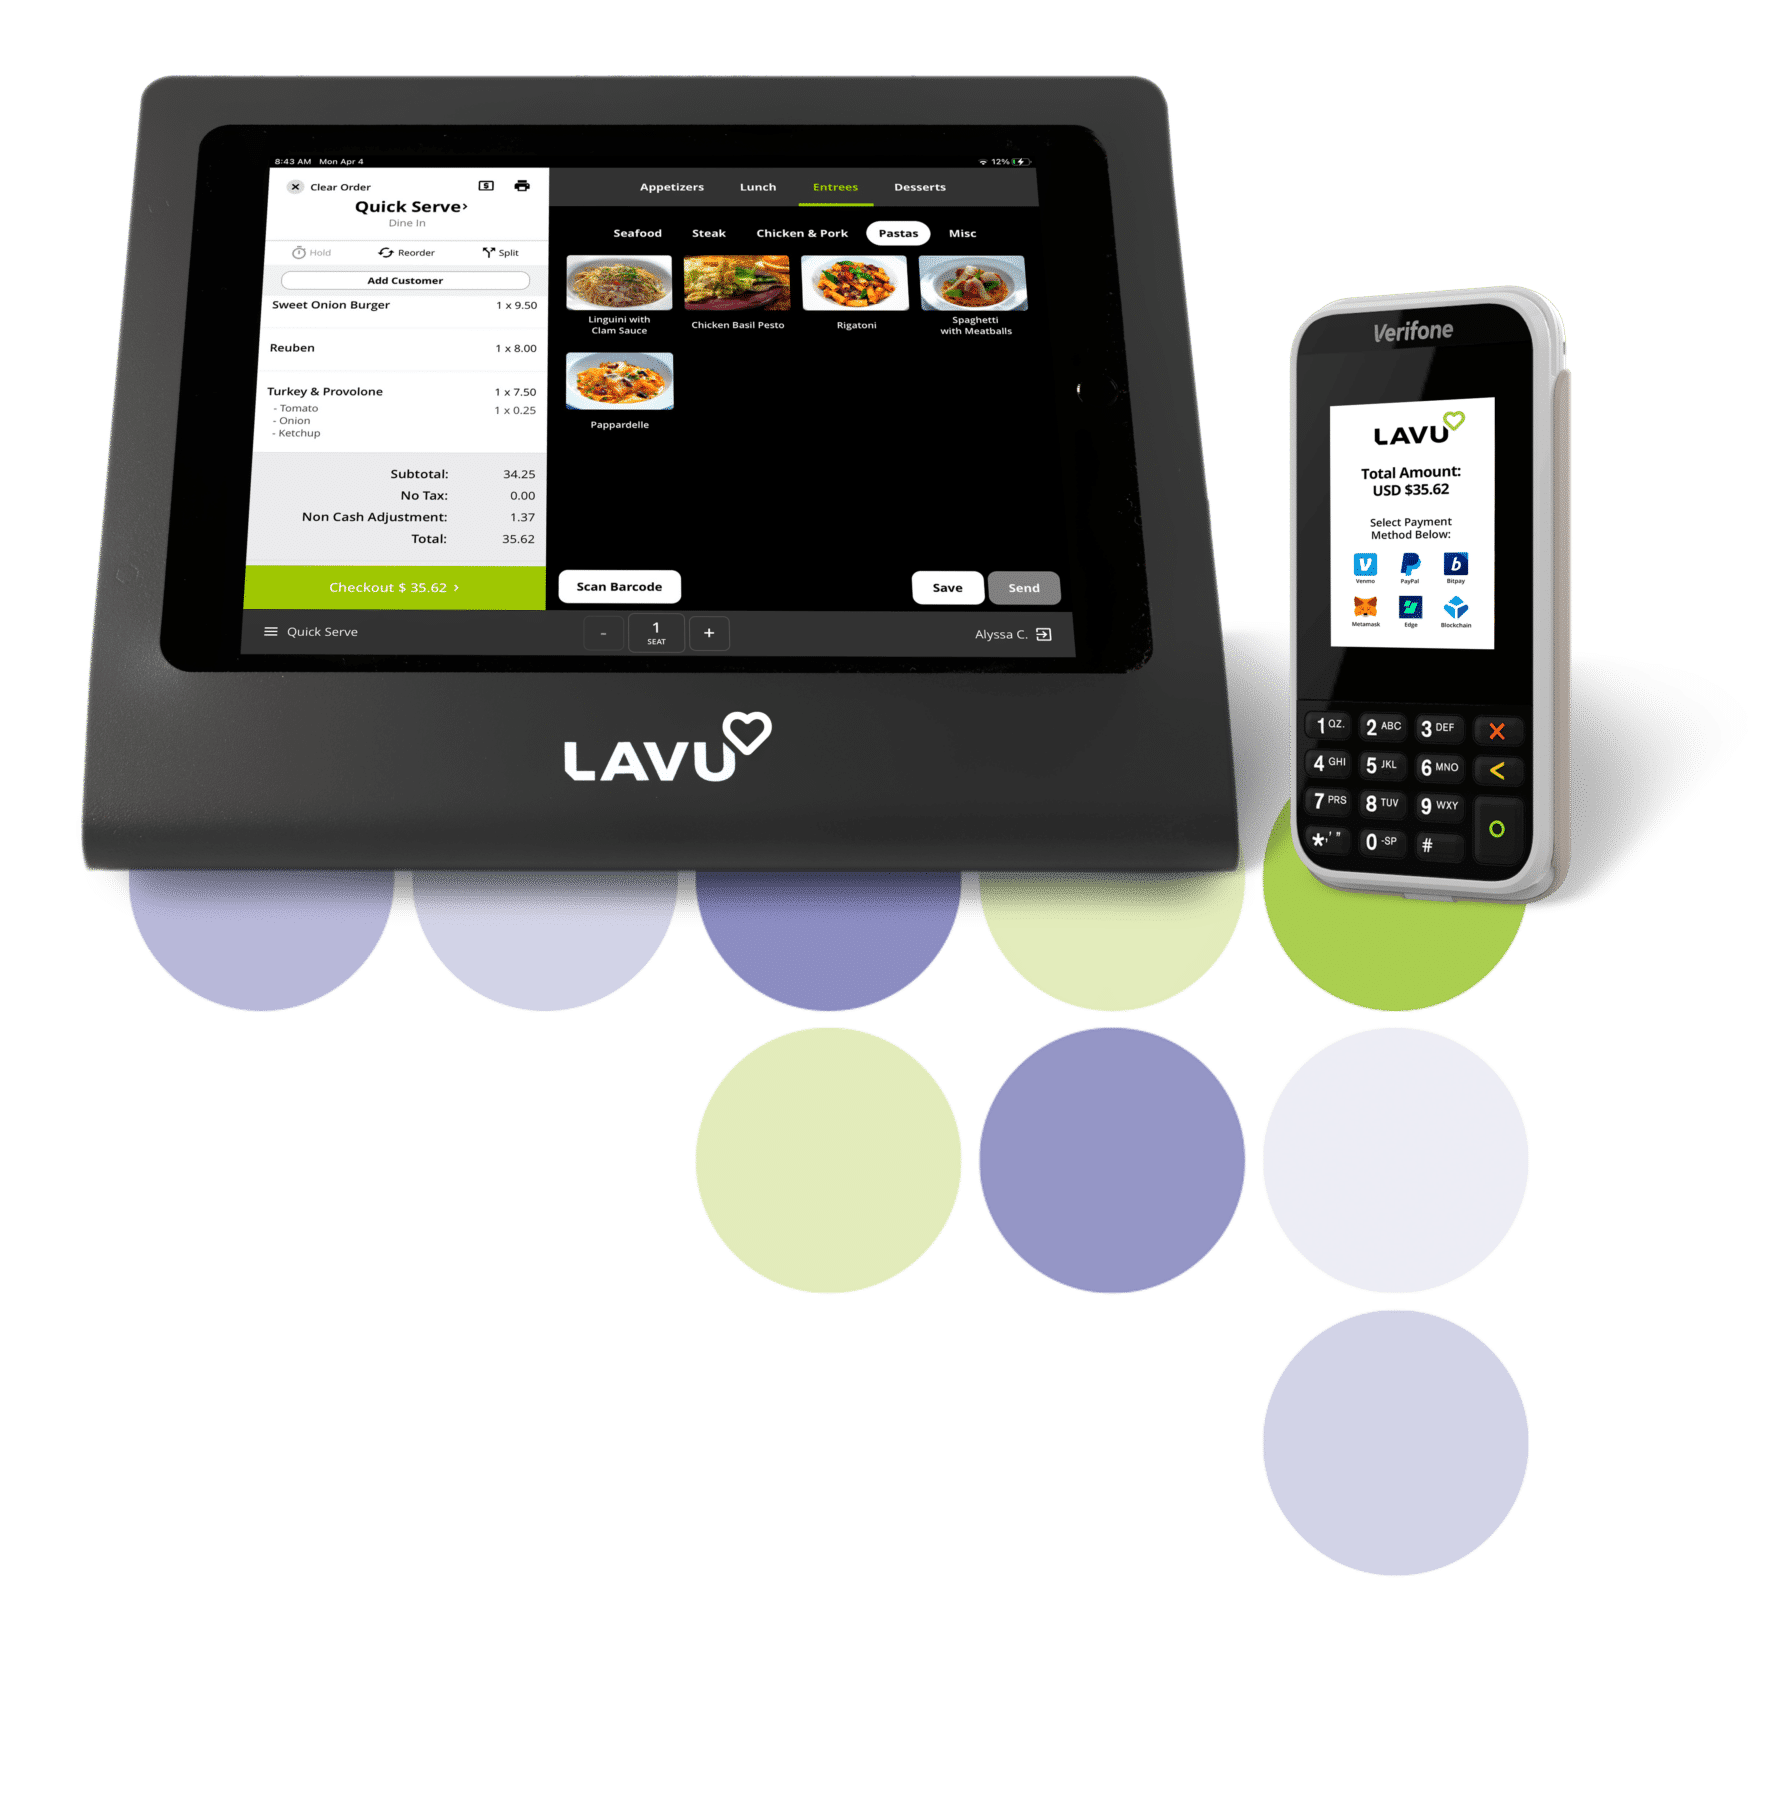 Lavu Server Station with Verifone Payment Device